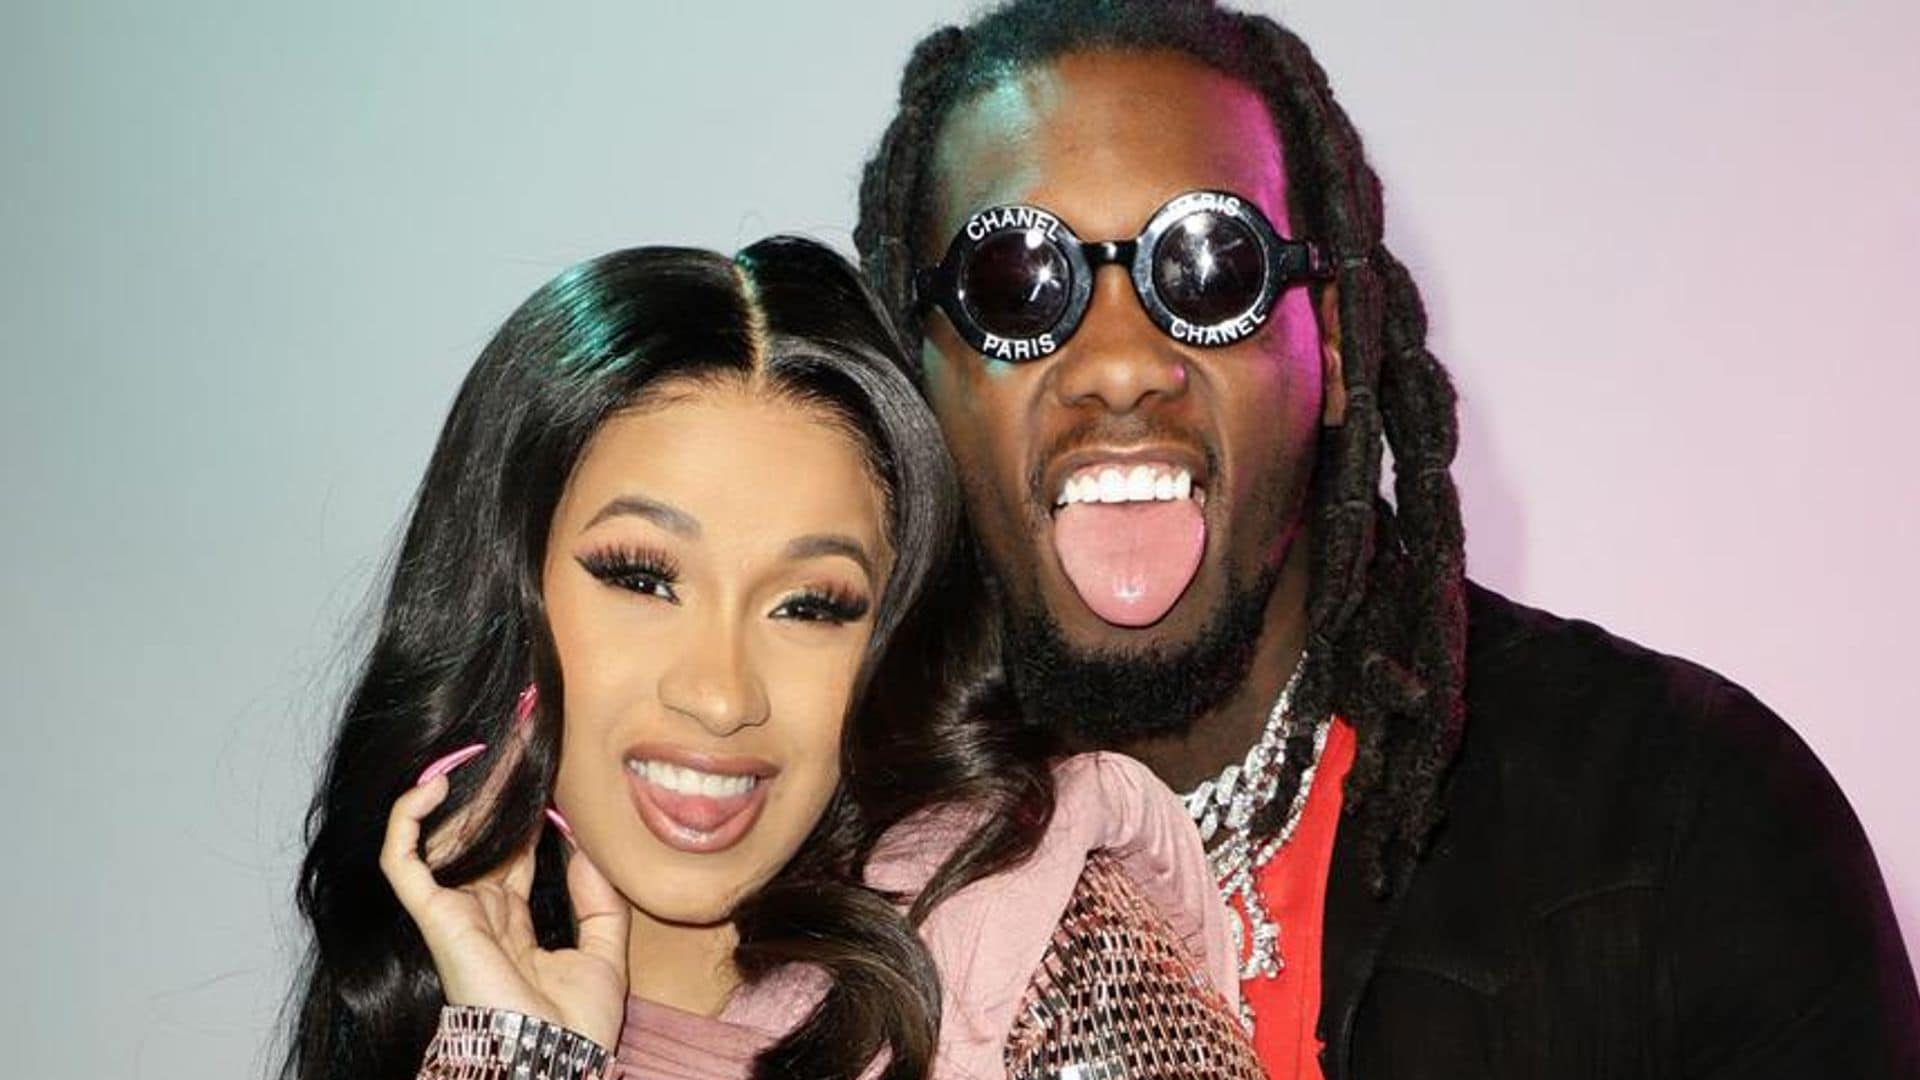 Cardi B stands by her husband Offset after social media account hack